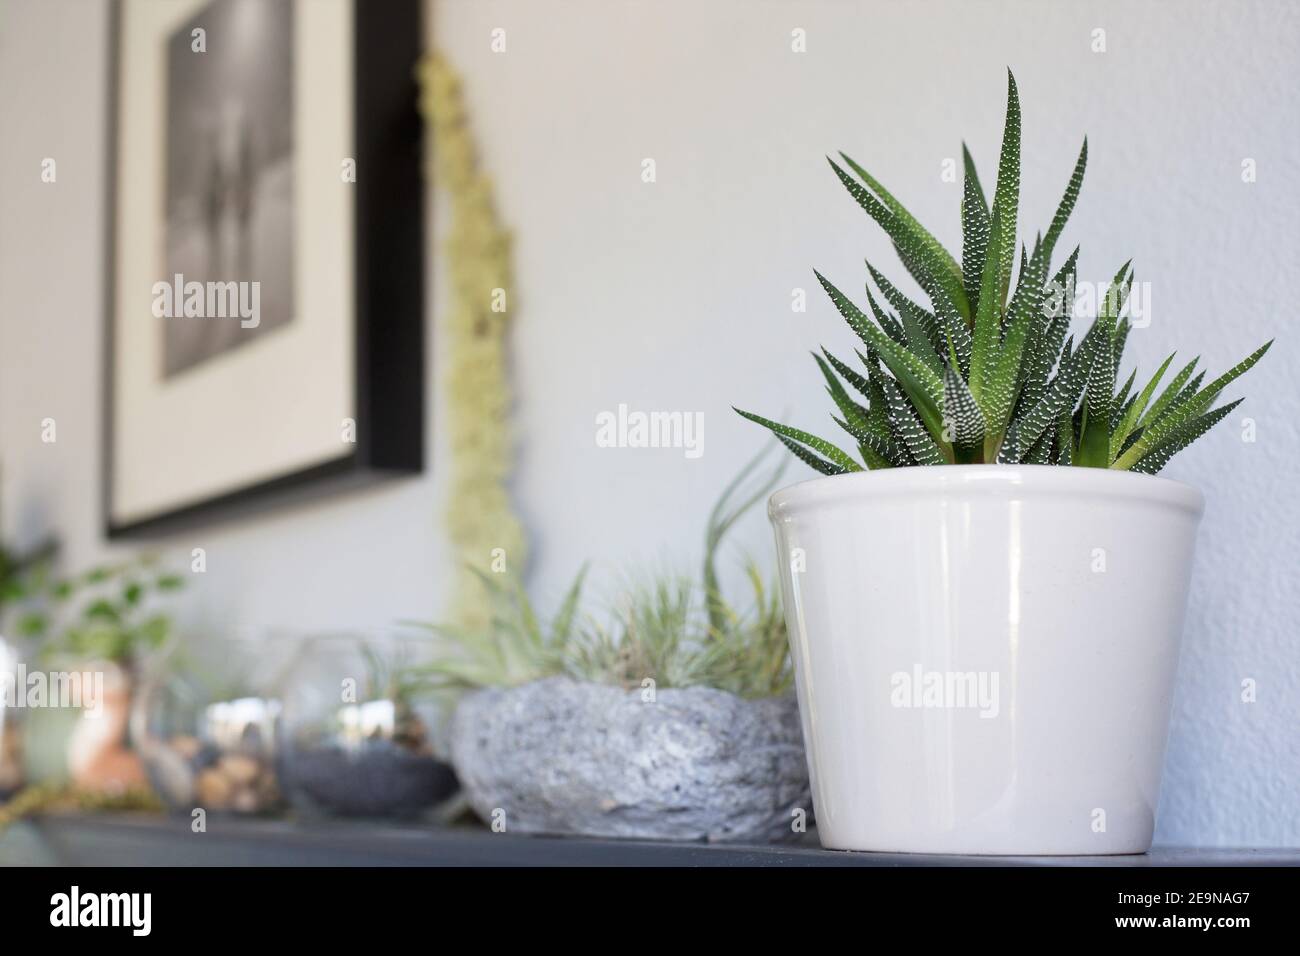 Haworthiopsis attenuata and other plants on a mantle. Stock Photo